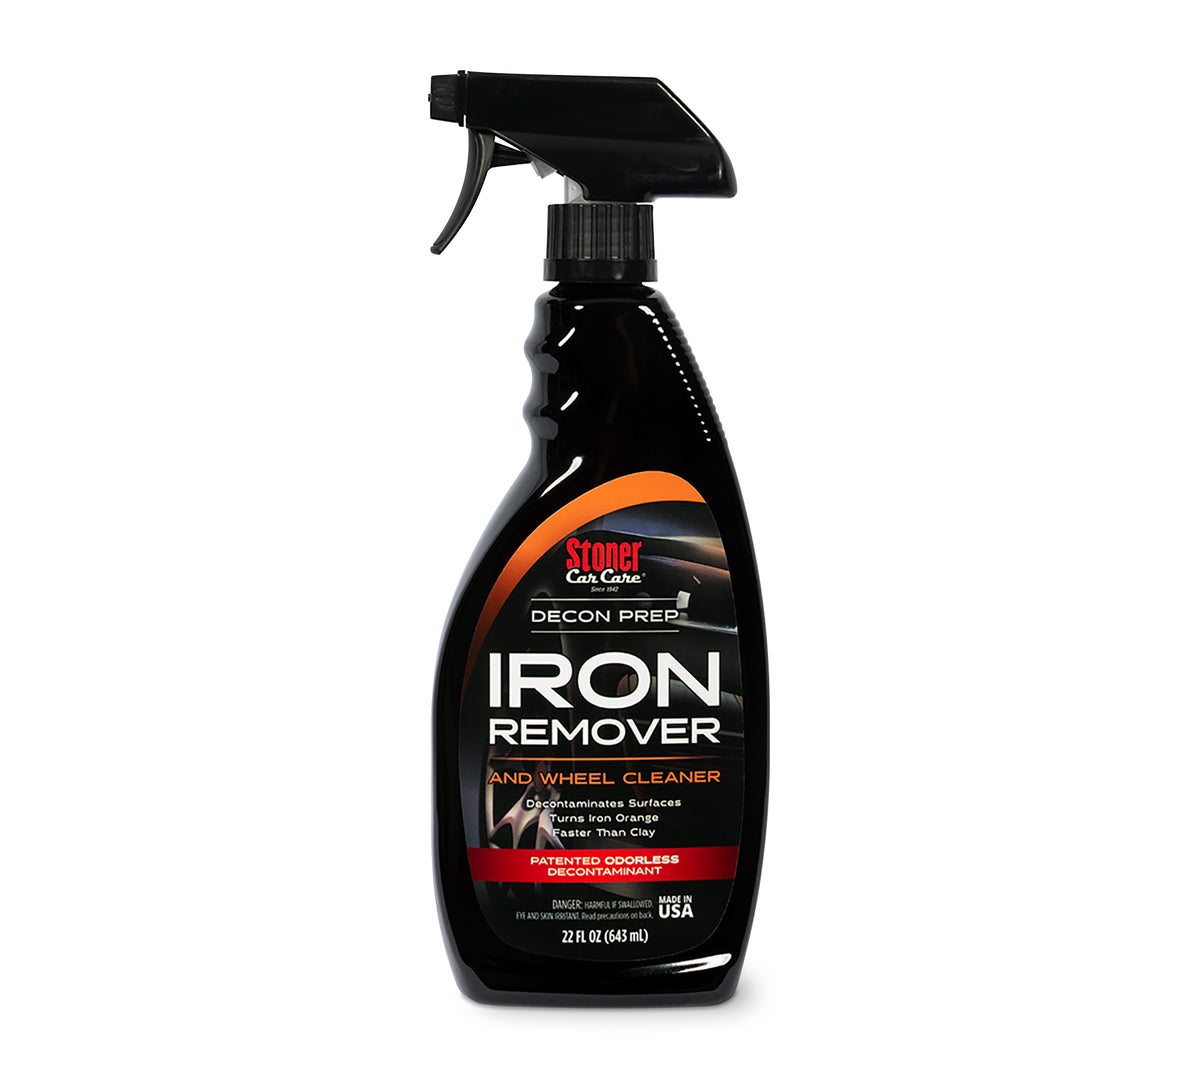 Iron Remover Manufacturer-15 Years Experience, Free Samples